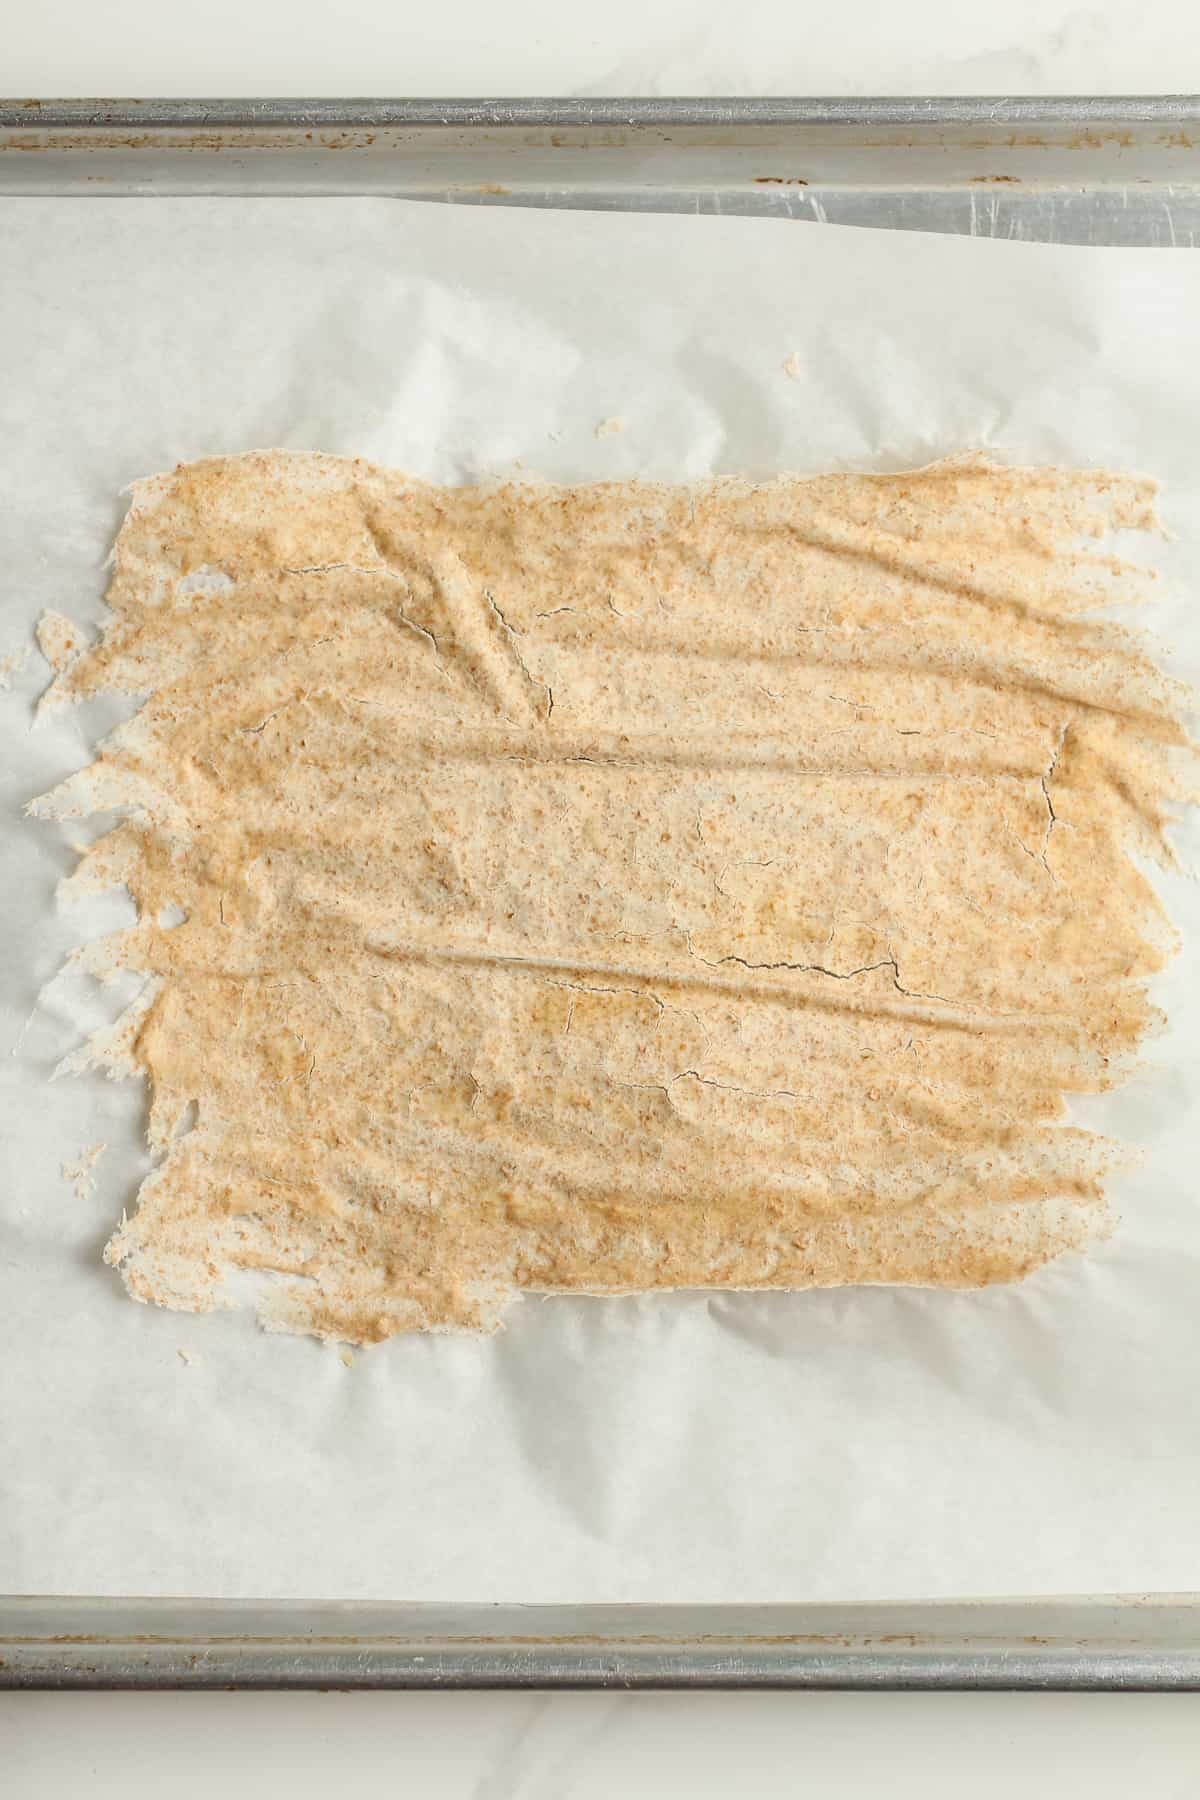 The dried starter on some parchment paper.